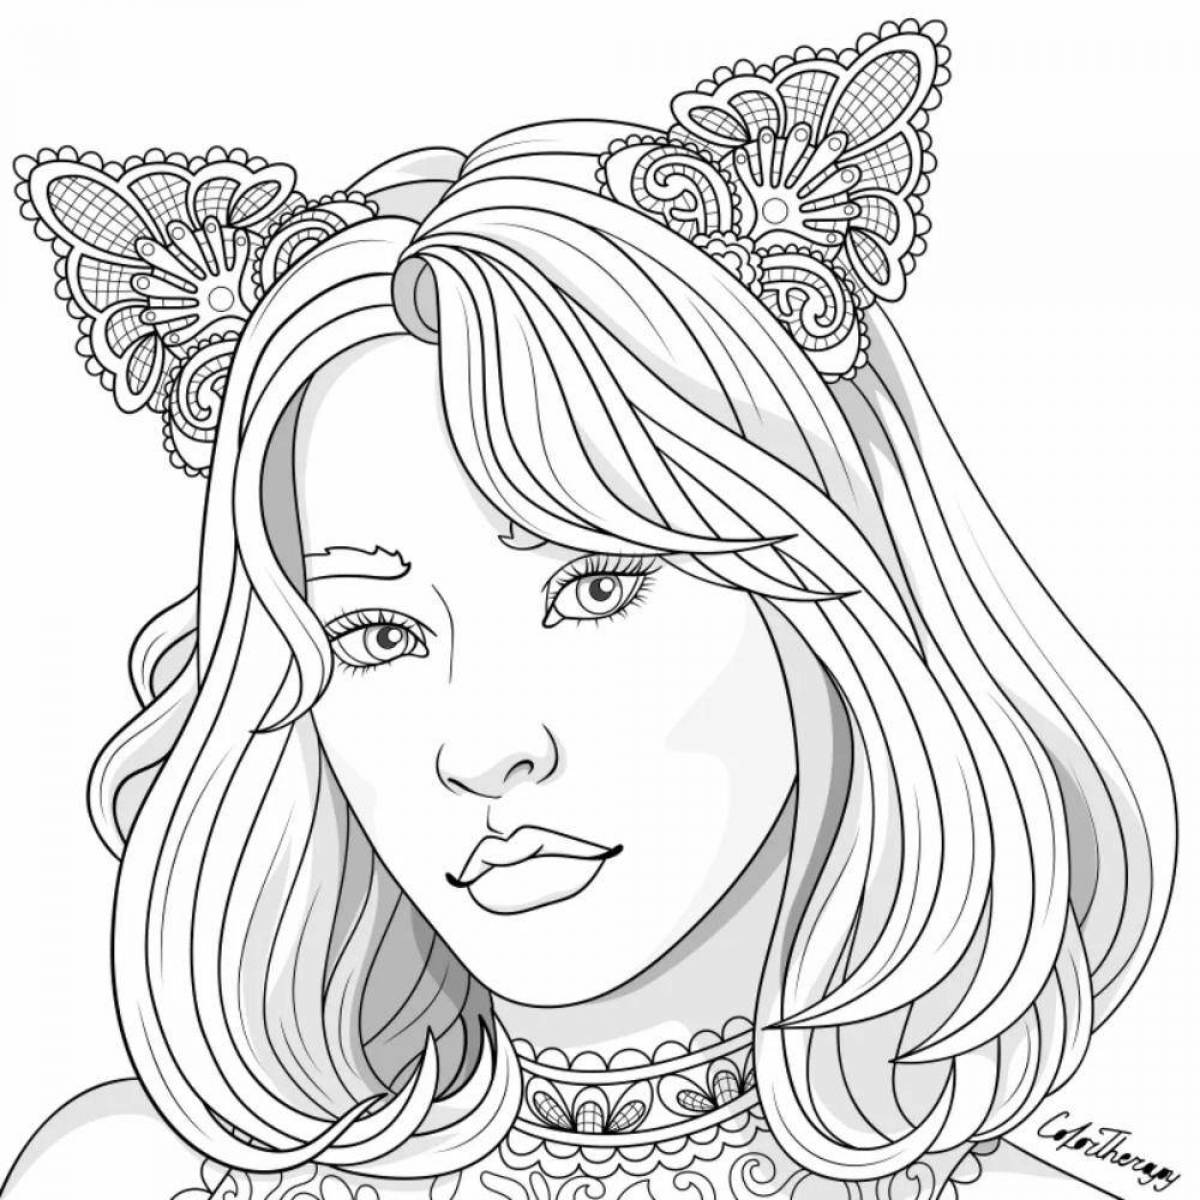 Elegant coloring book for girls 13-14 years old